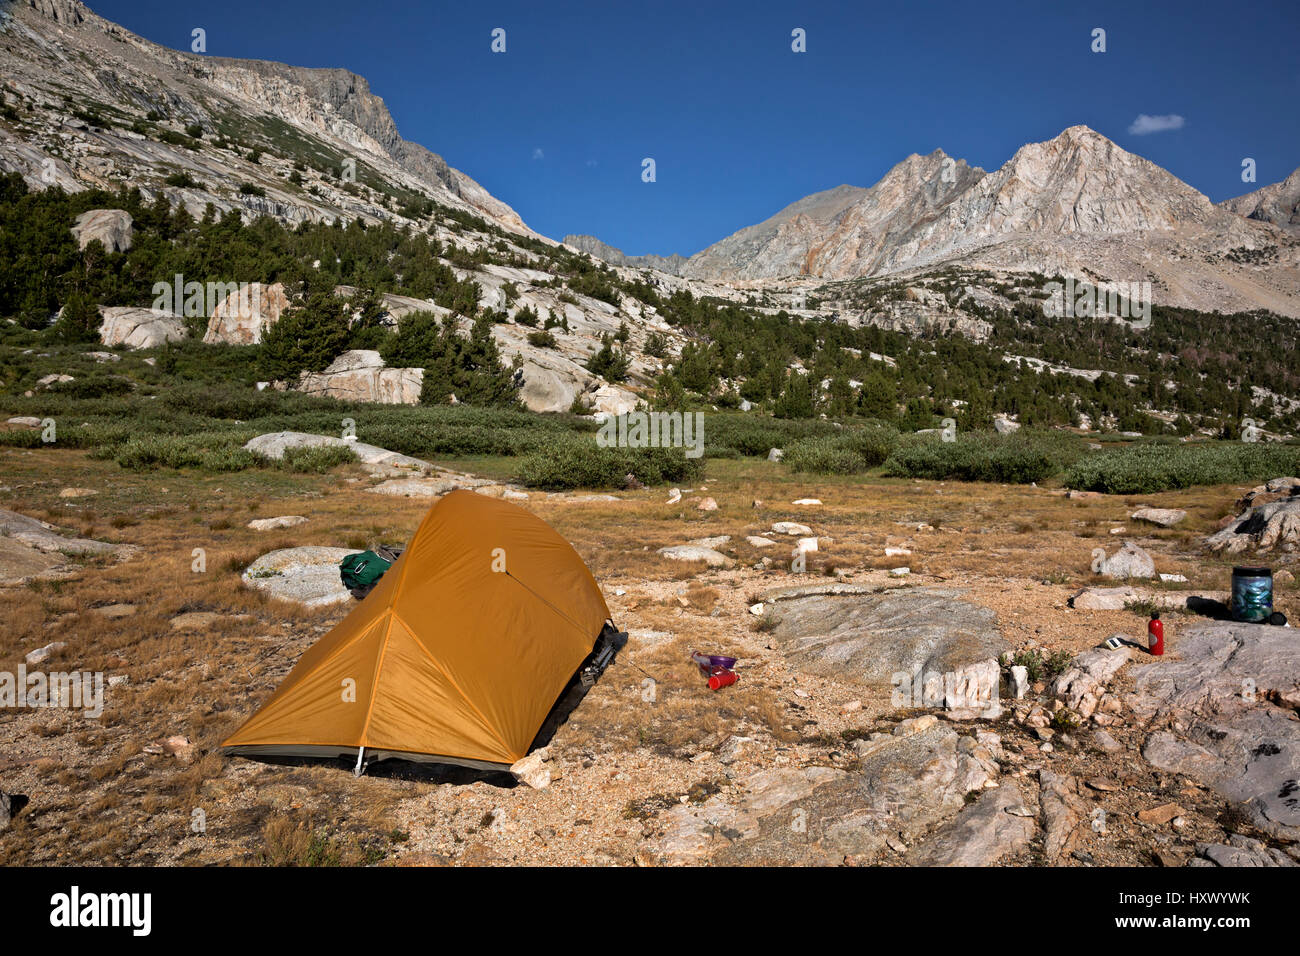 CA03135-00...CALIFORNIA - Campsite at Palisade Lakes below on the combined JMT/PCT below Mather Pass in Kings Canyon National Park. Stock Photo